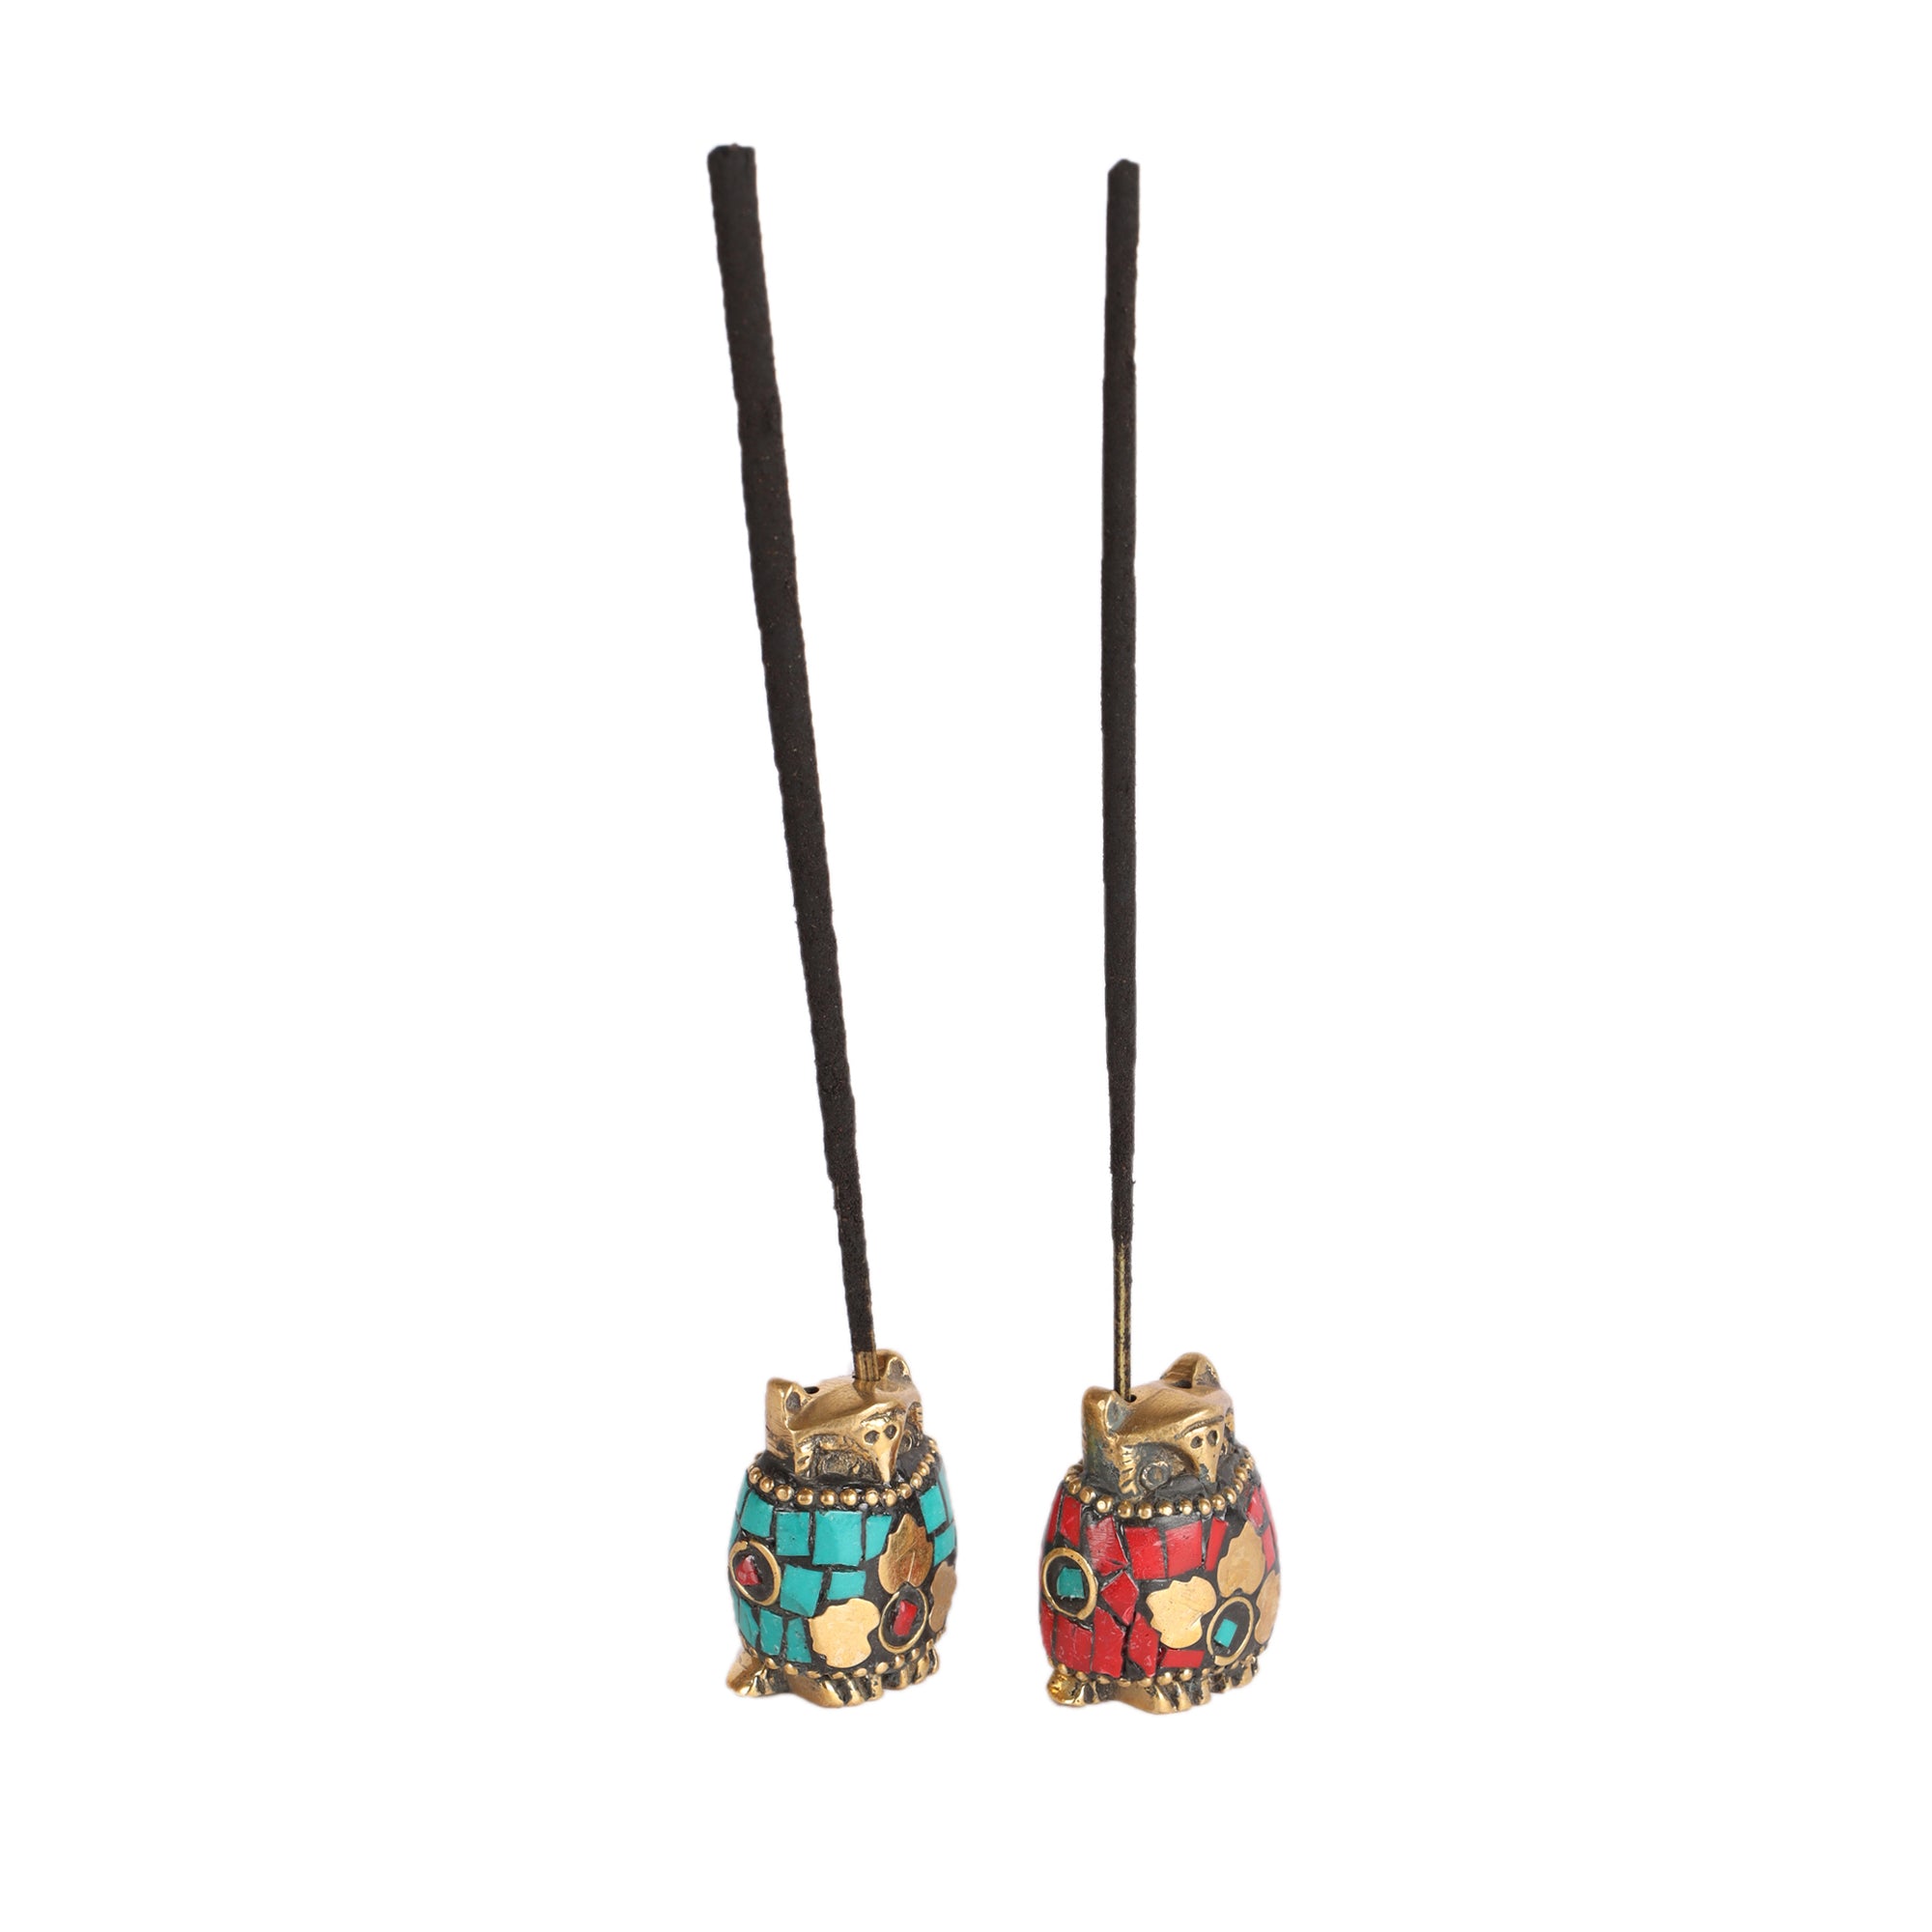 Tiny Owls - Incense Holders (set of 2)